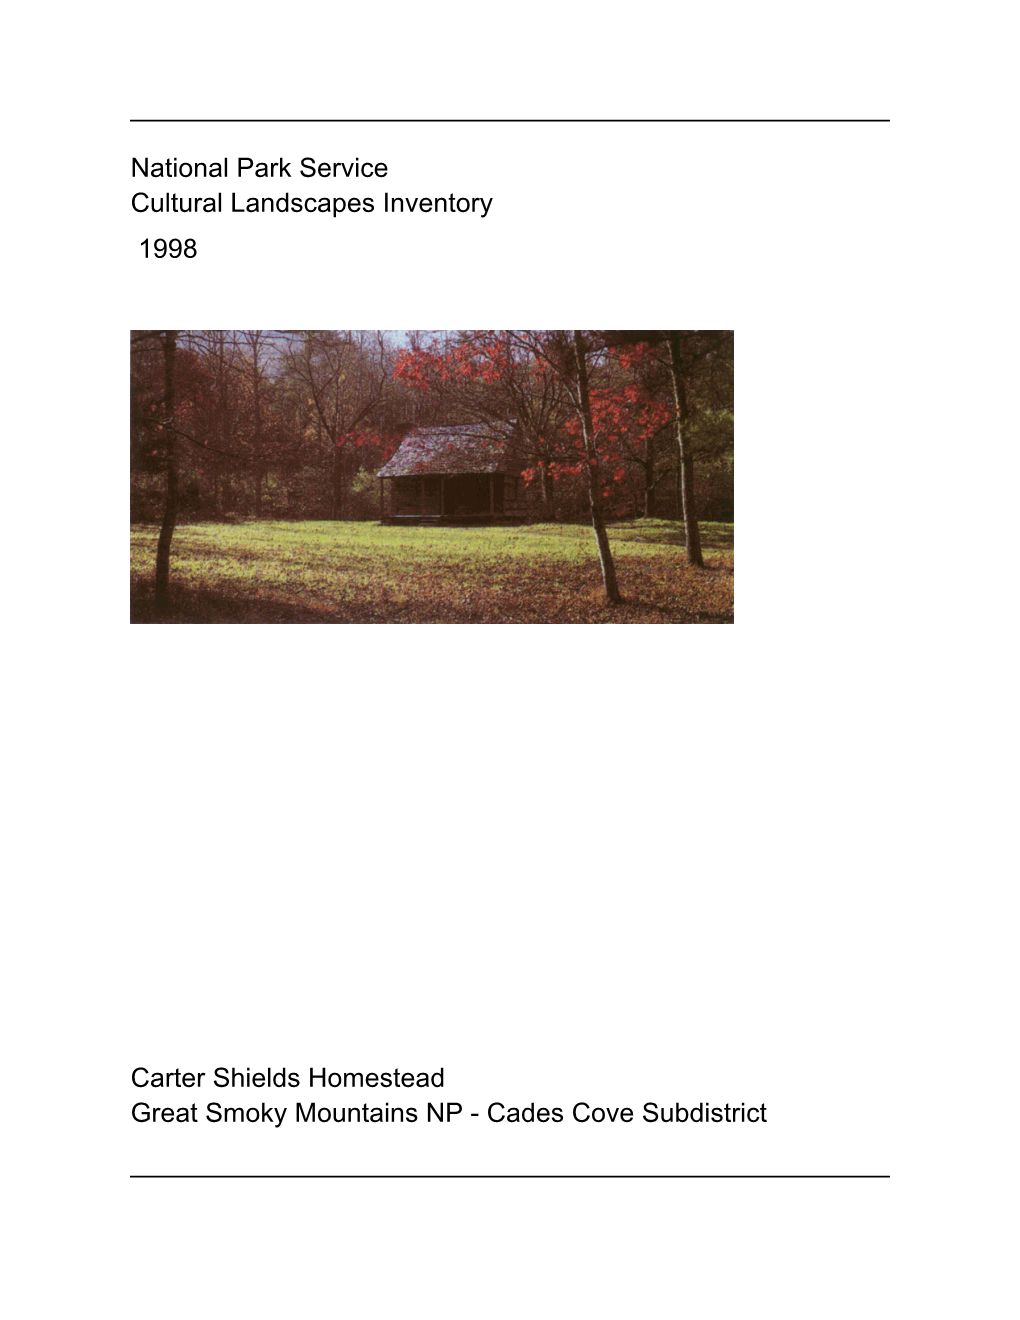 National Park Service Cultural Landscapes Inventory Carter Shields Homestead Great Smoky Mountains NP